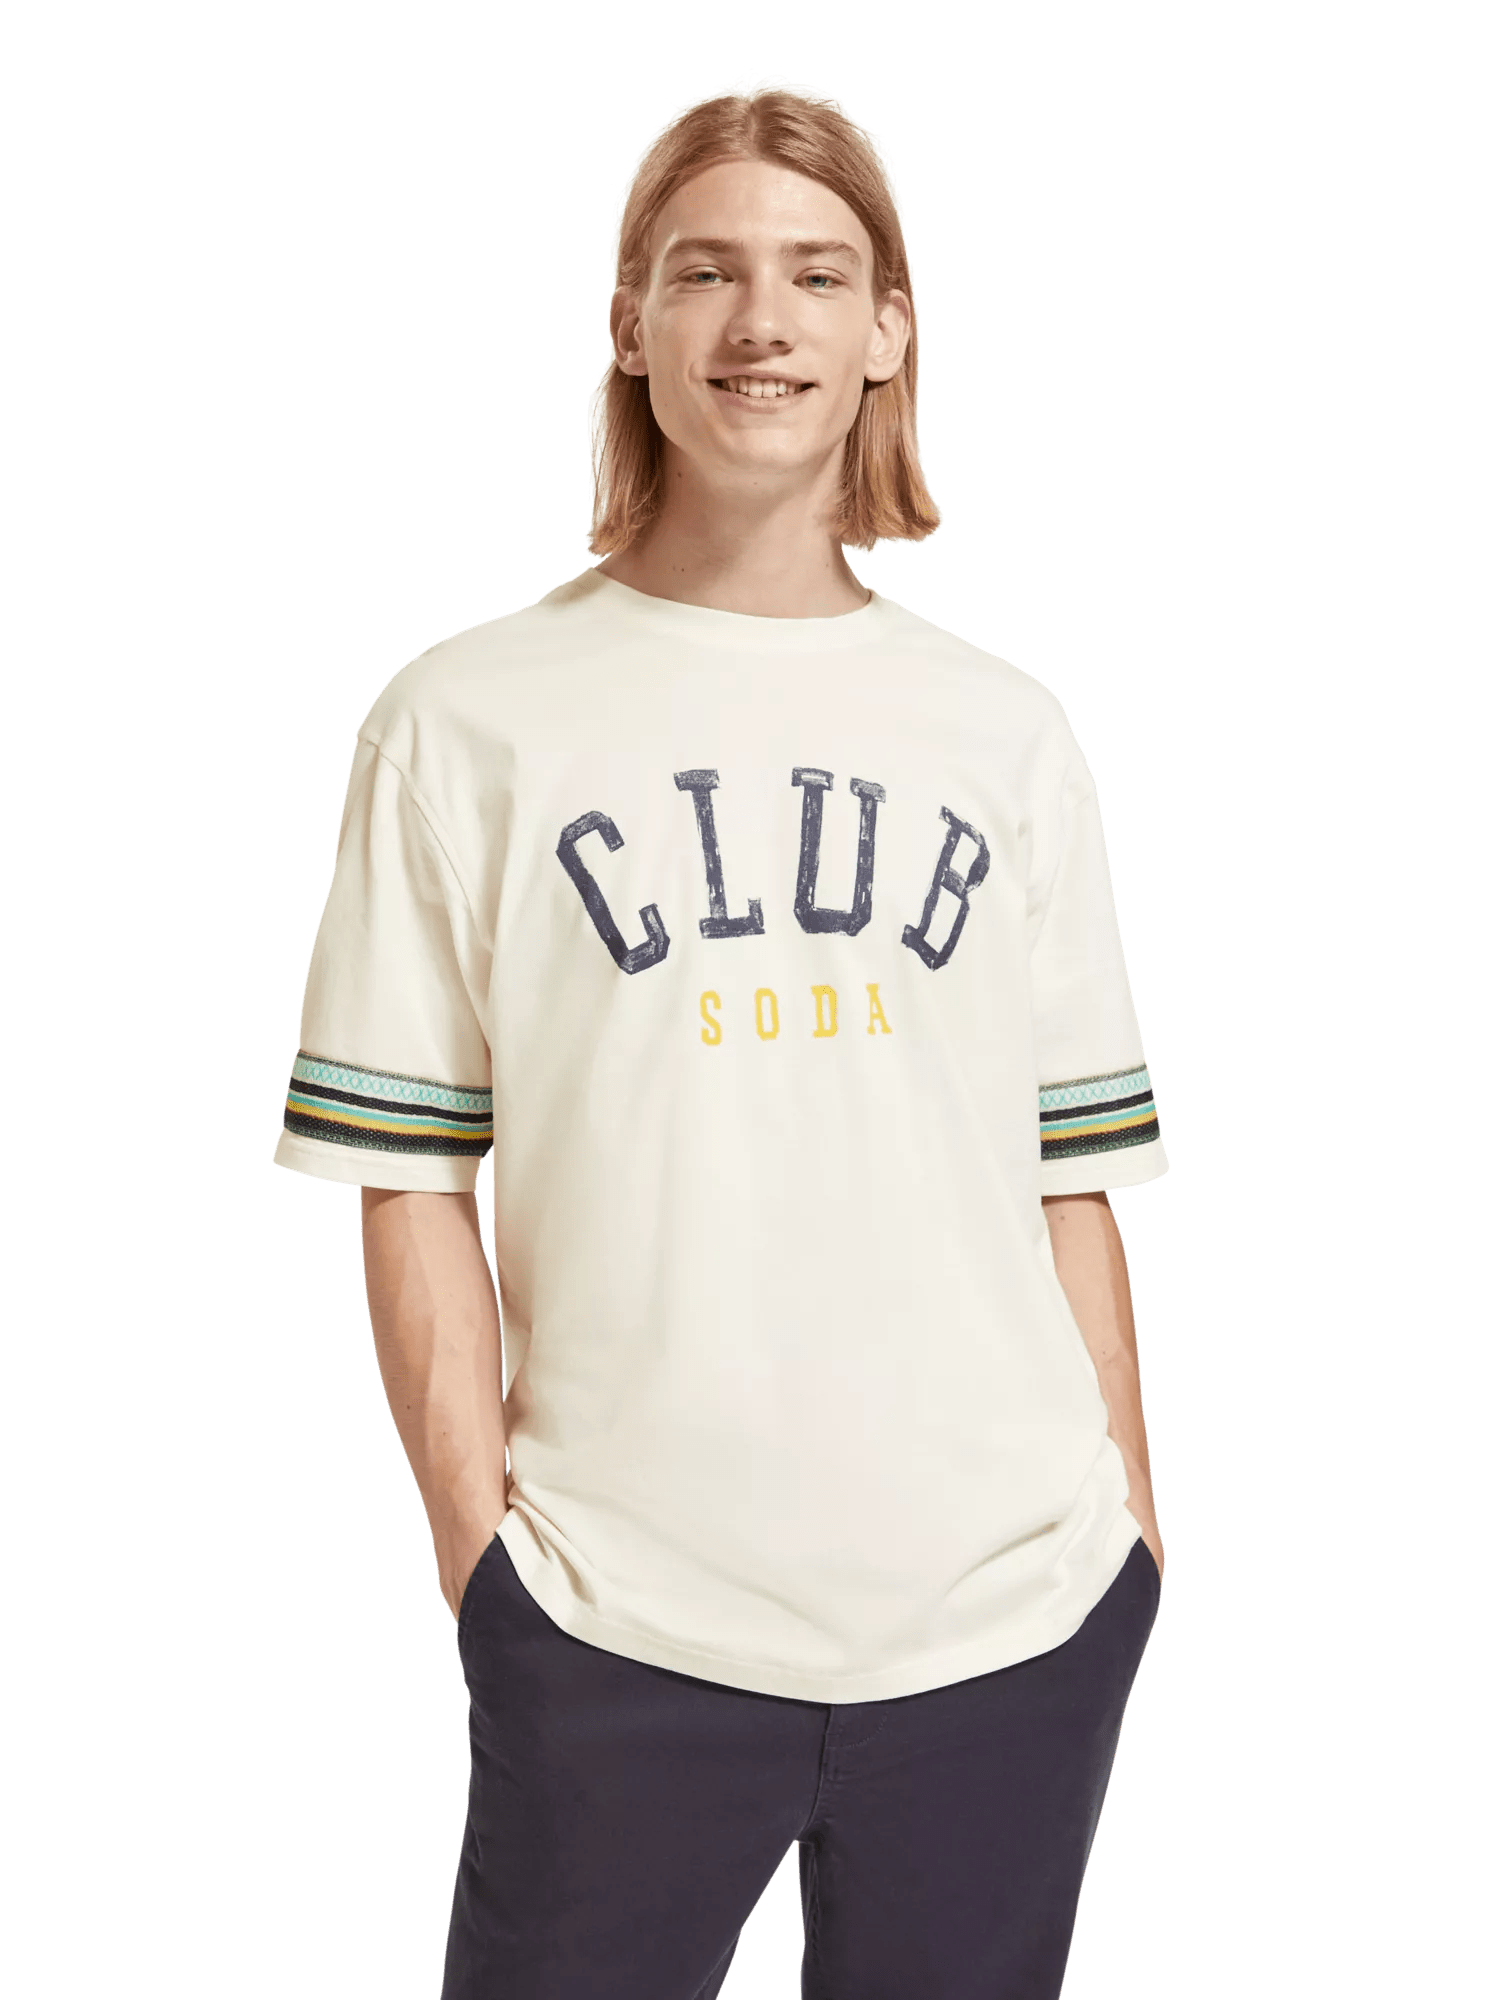 Relaxed fit club soda applique T-shirt in Organic Cotton